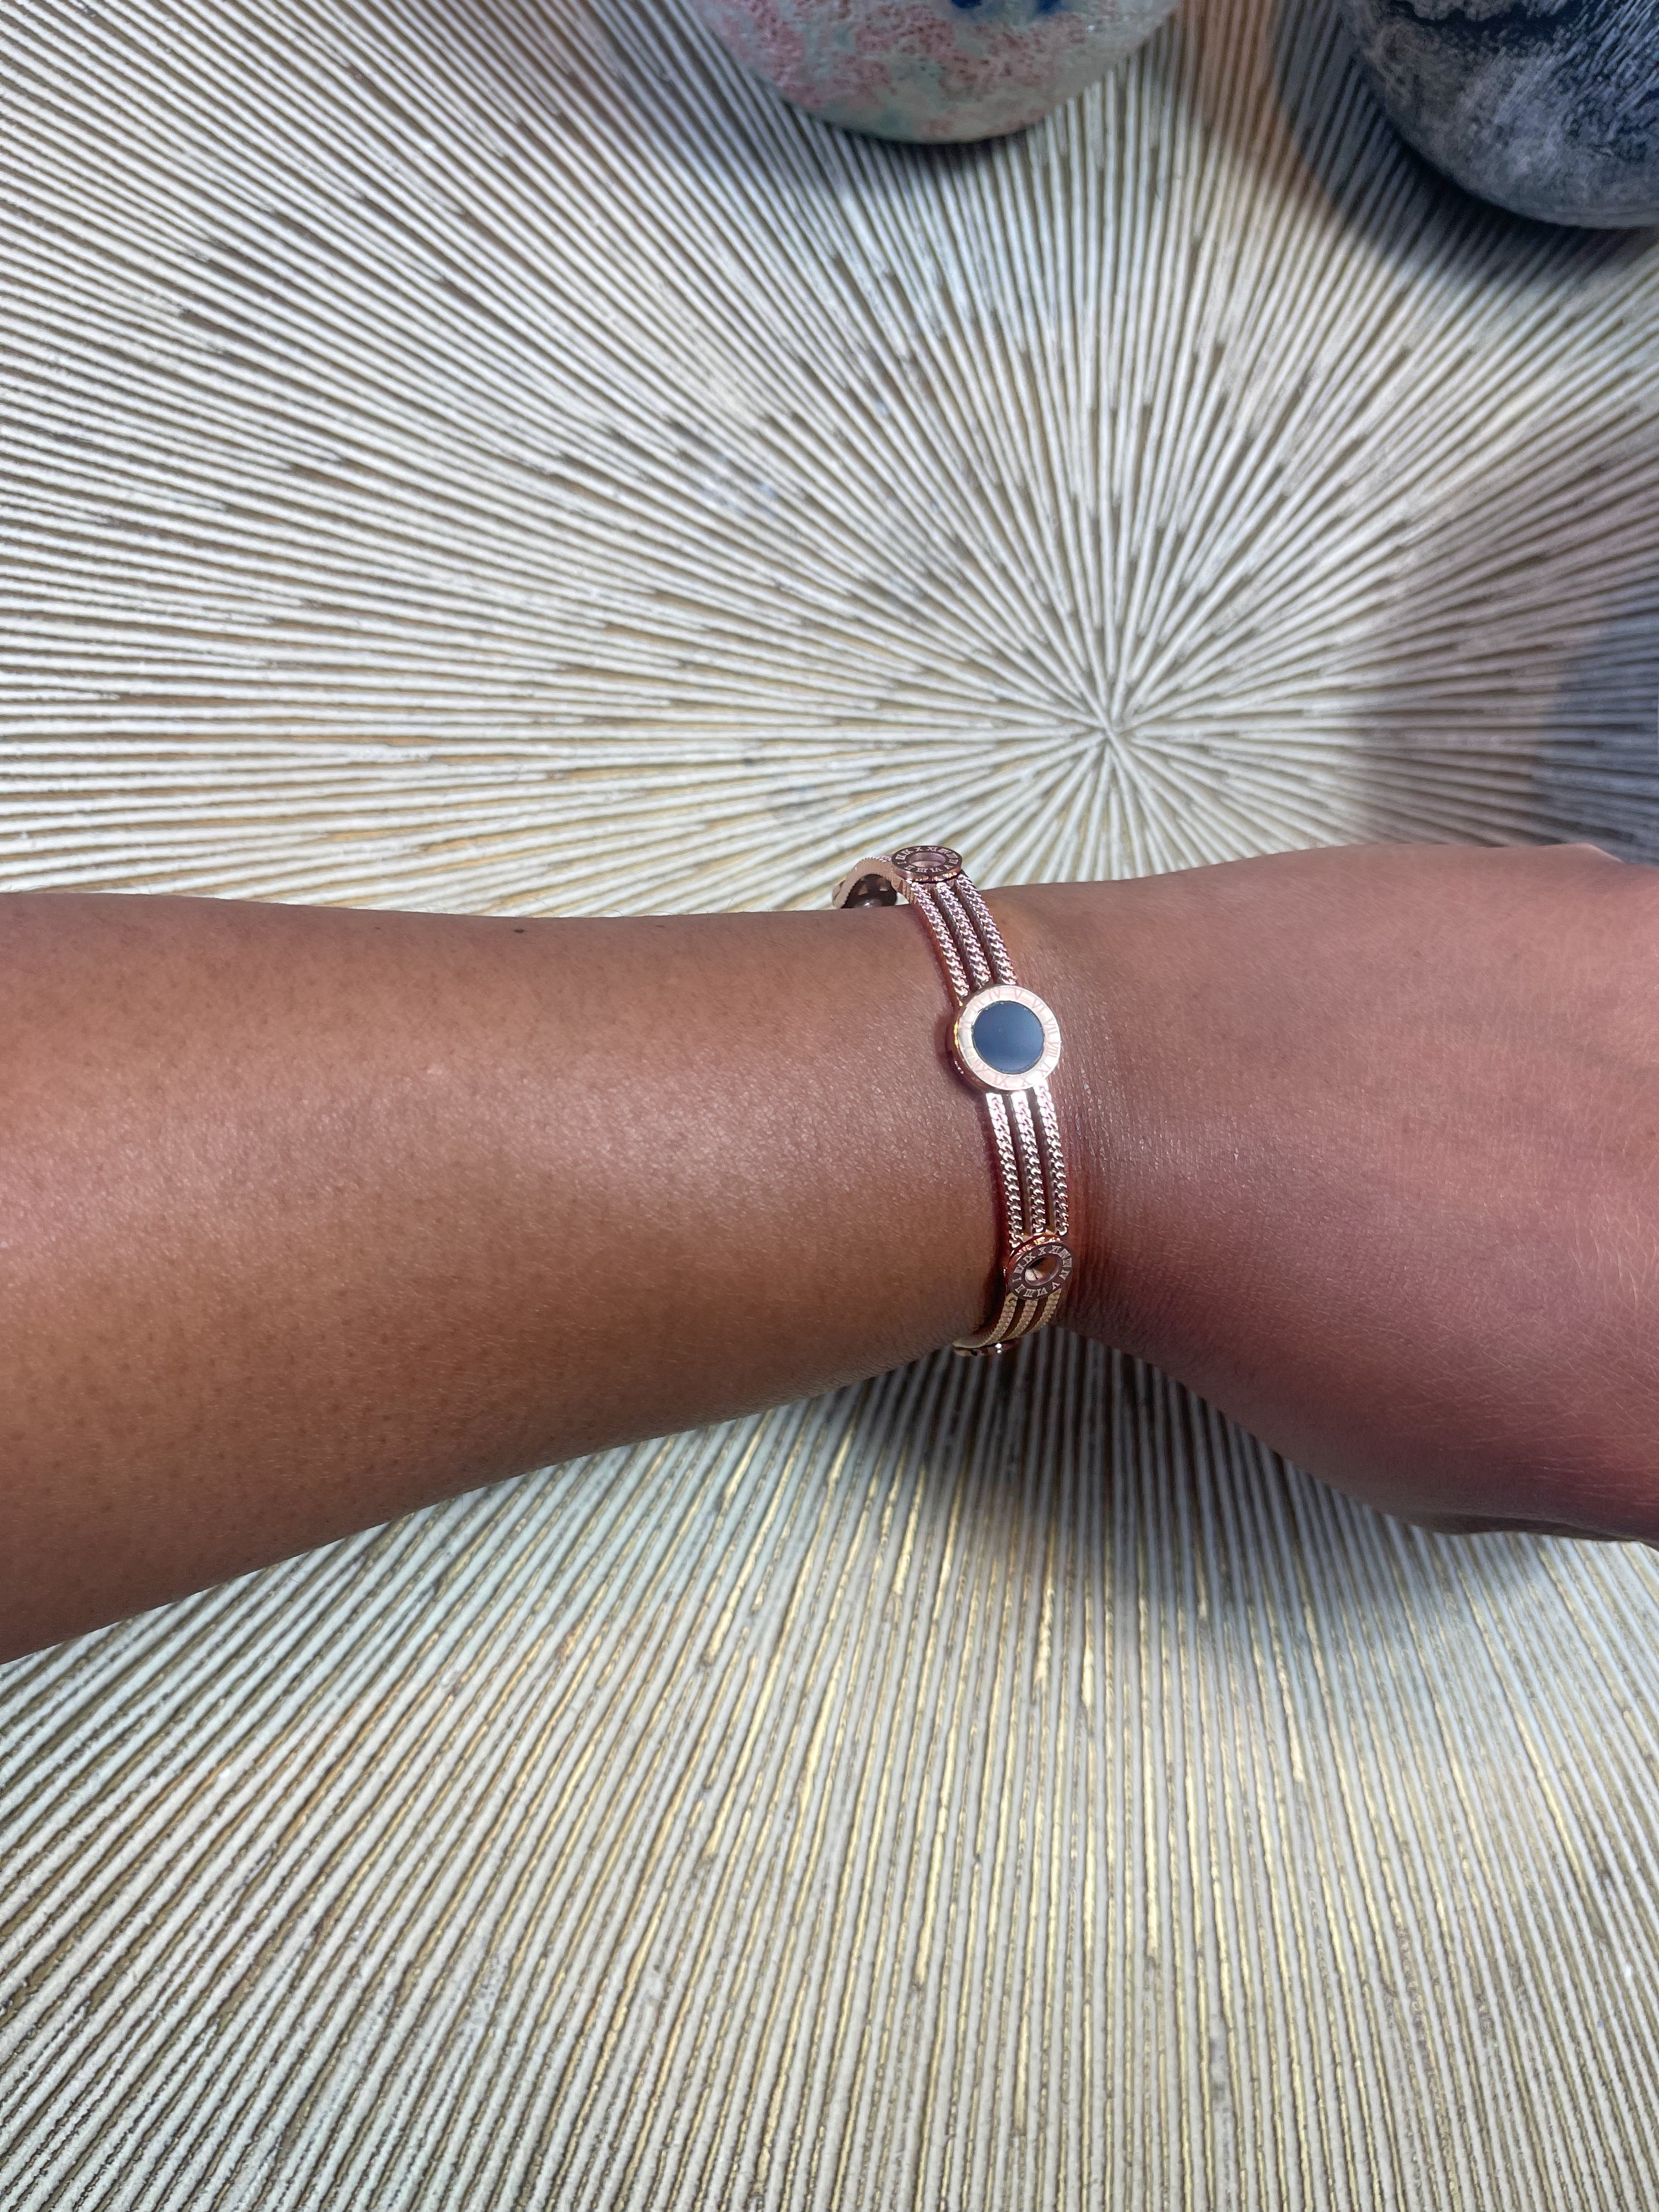 GOLDxTEAL rose gold plated stainless steel bracelet. Stylish stacking bracelets.